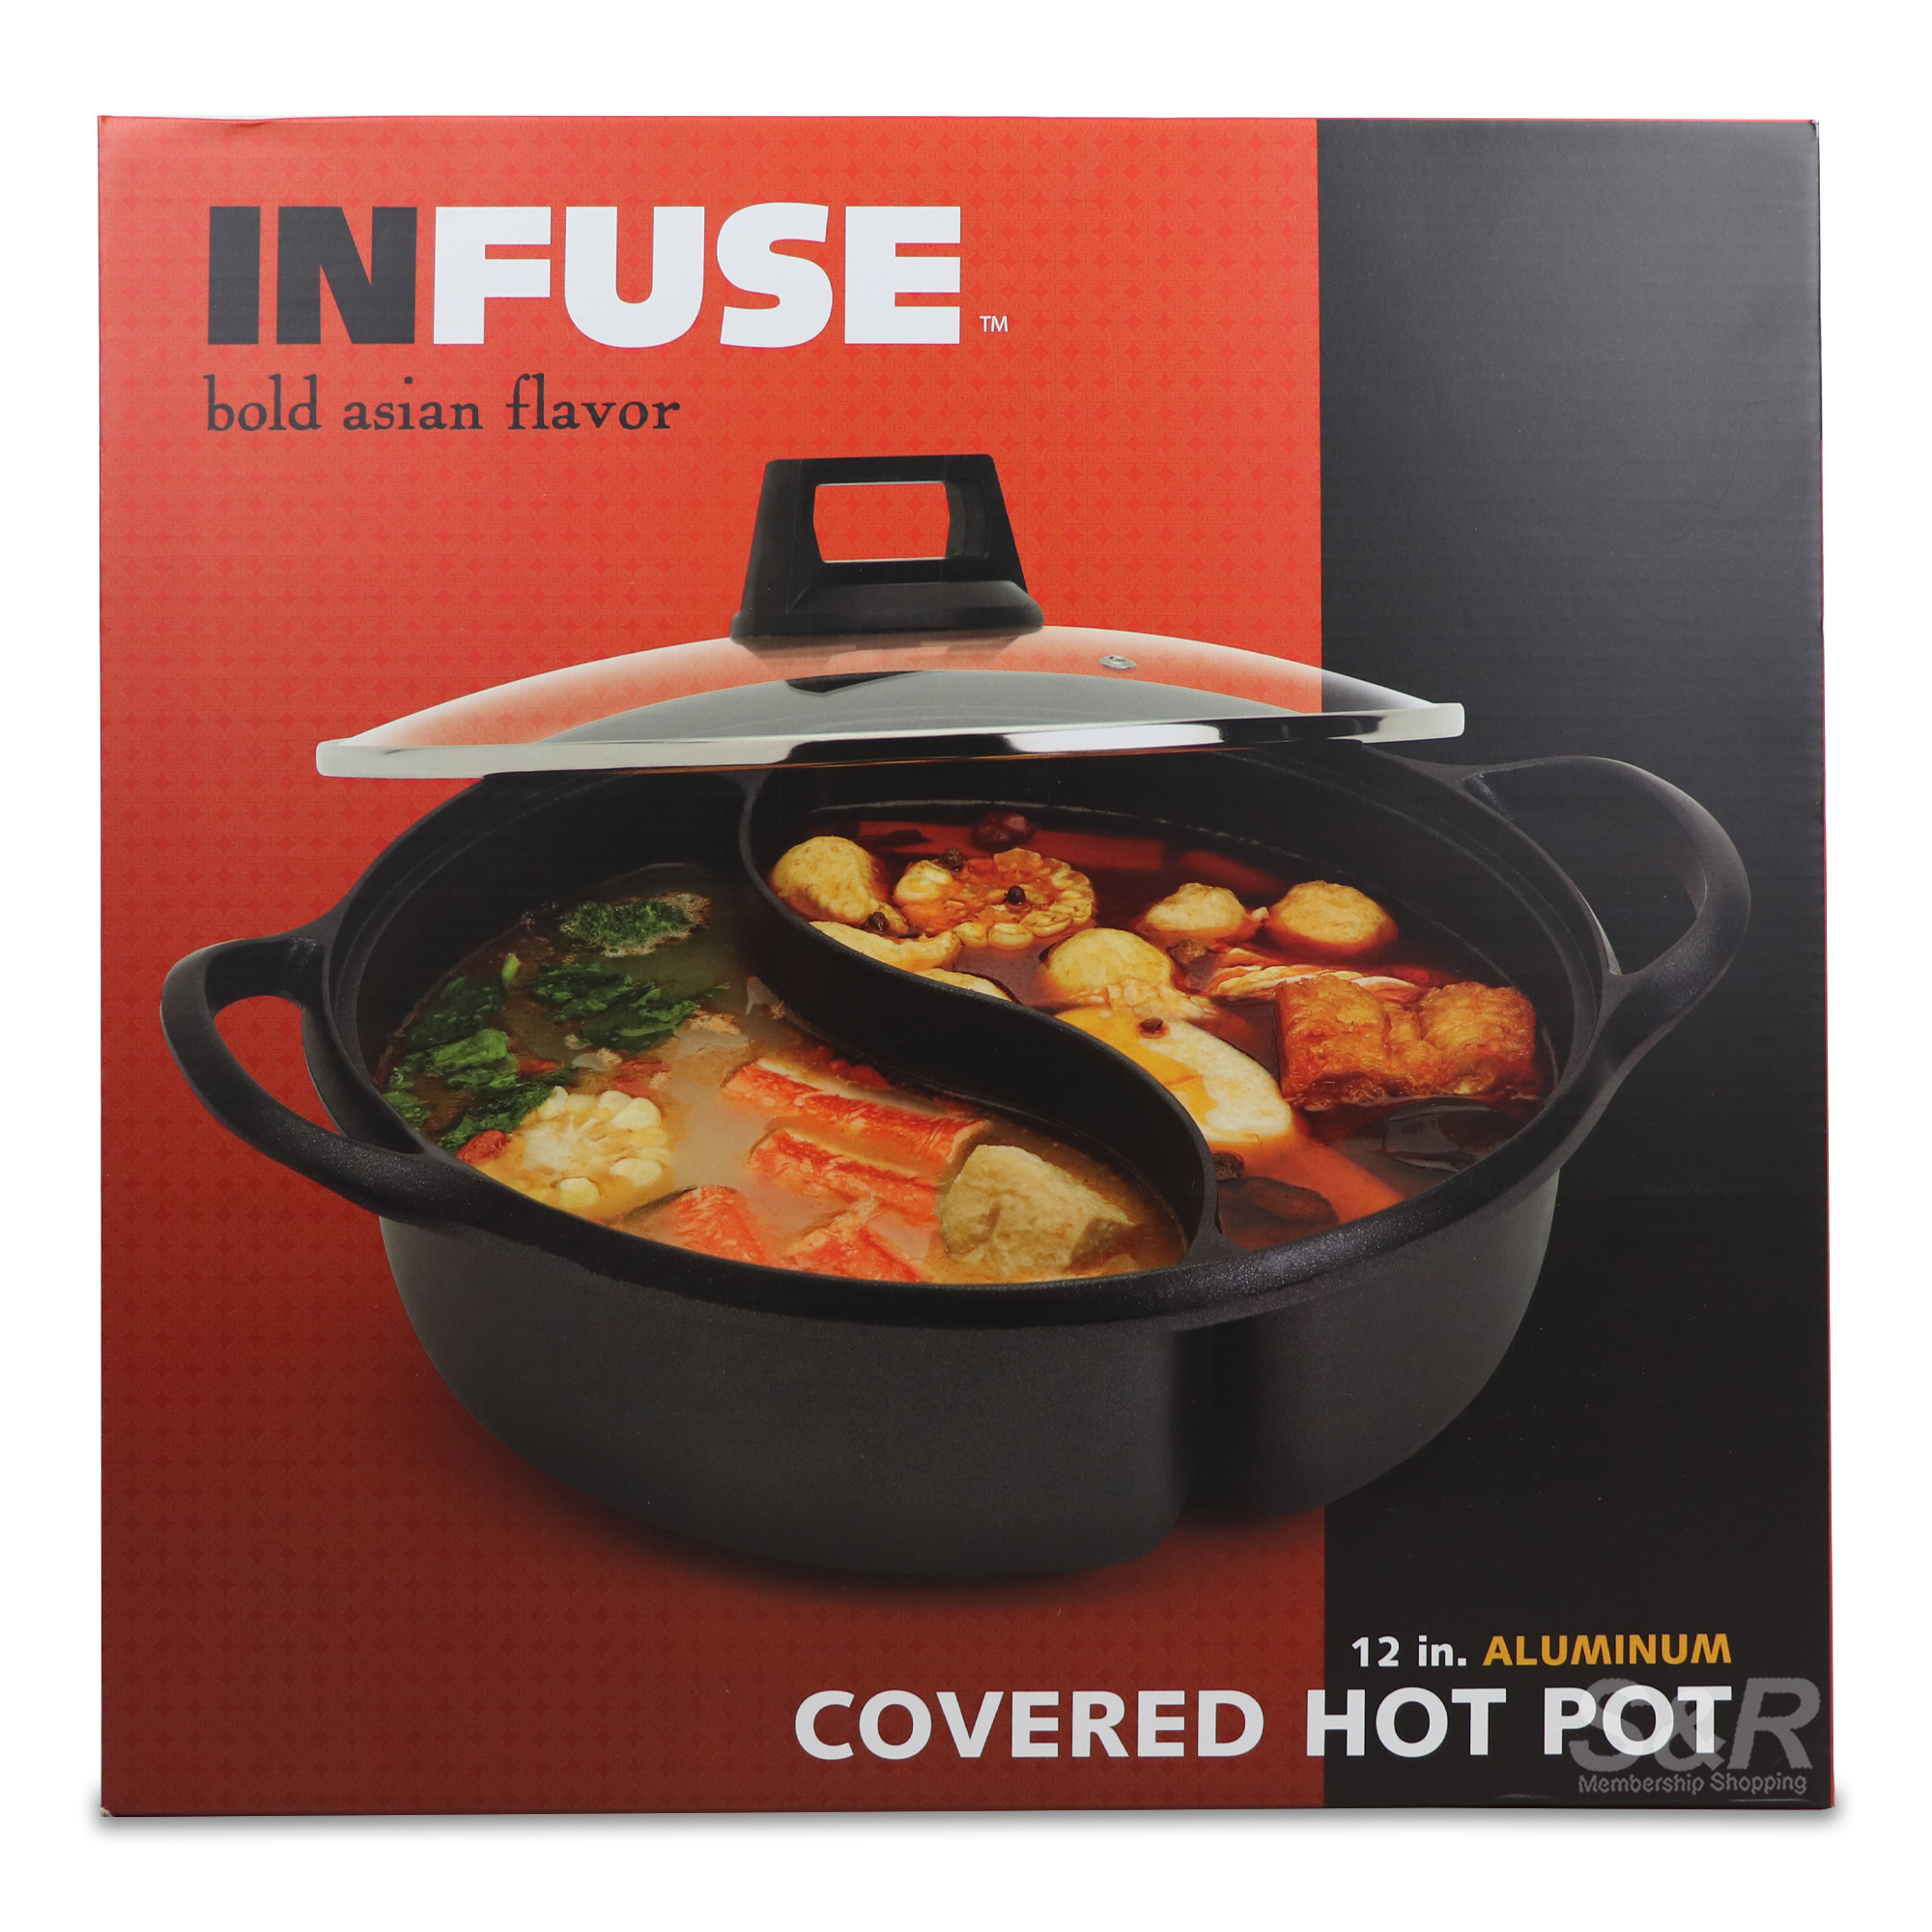 Infuse 12in Aluminum Covered Hot Pot